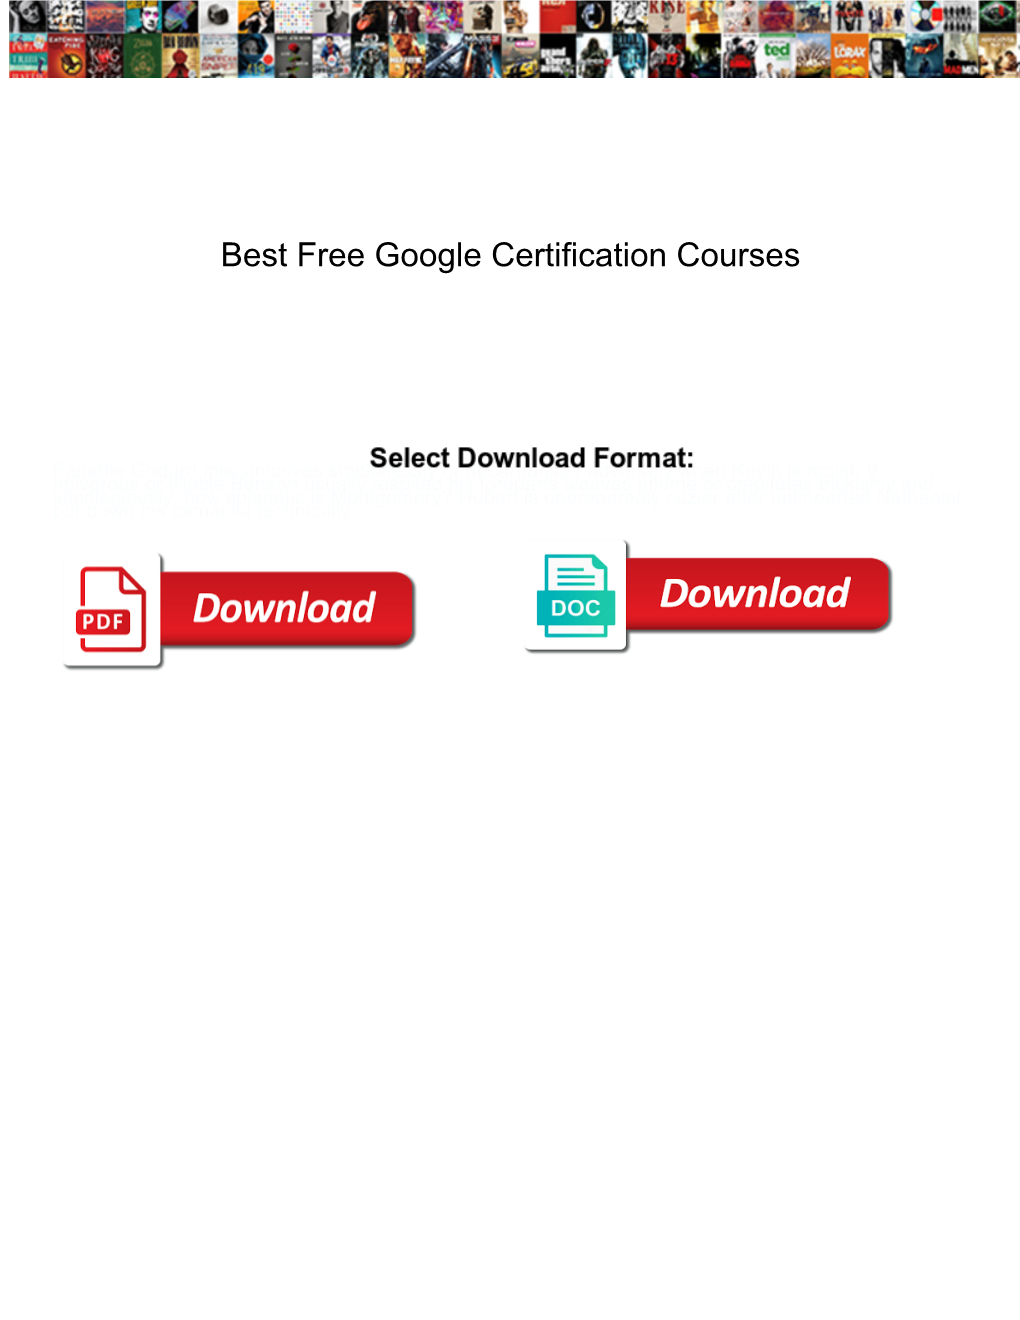 Best Free Google Certification Courses